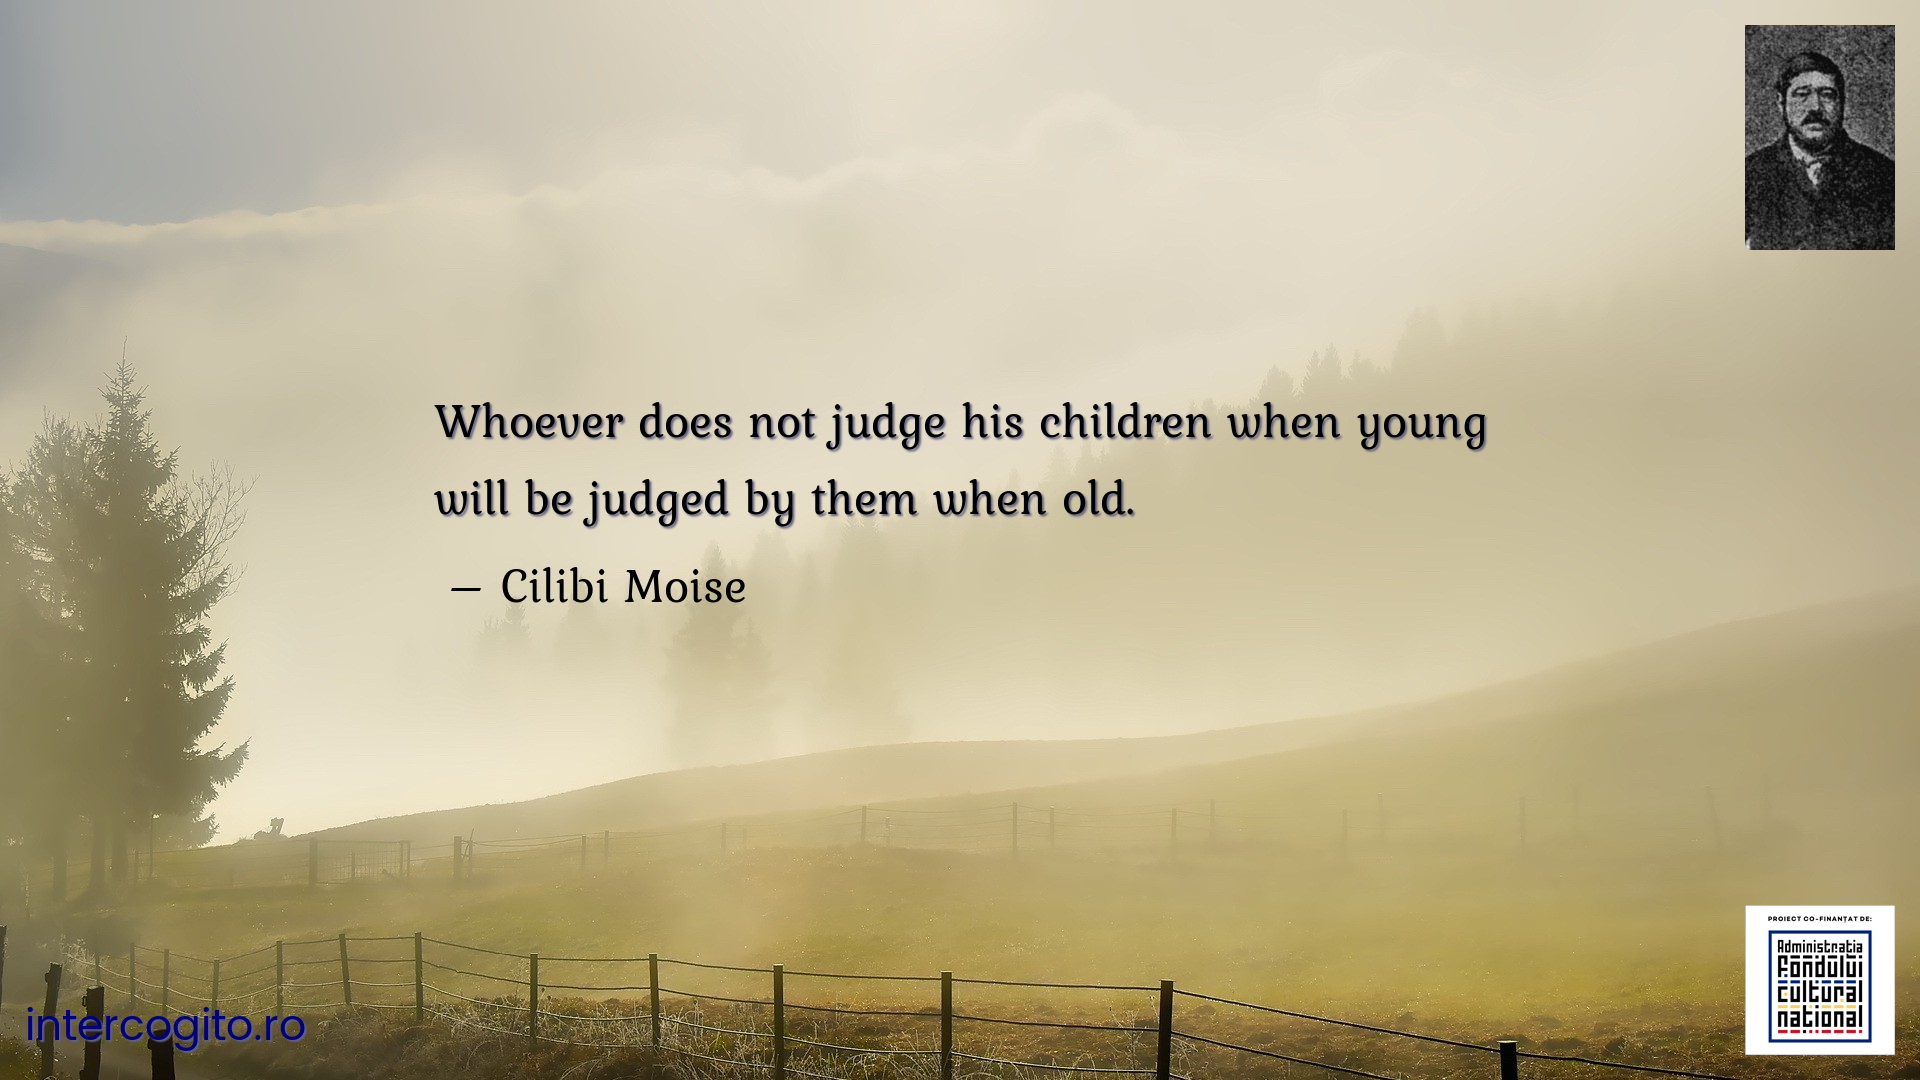 Whoever does not judge his children when young will be judged by them when old.